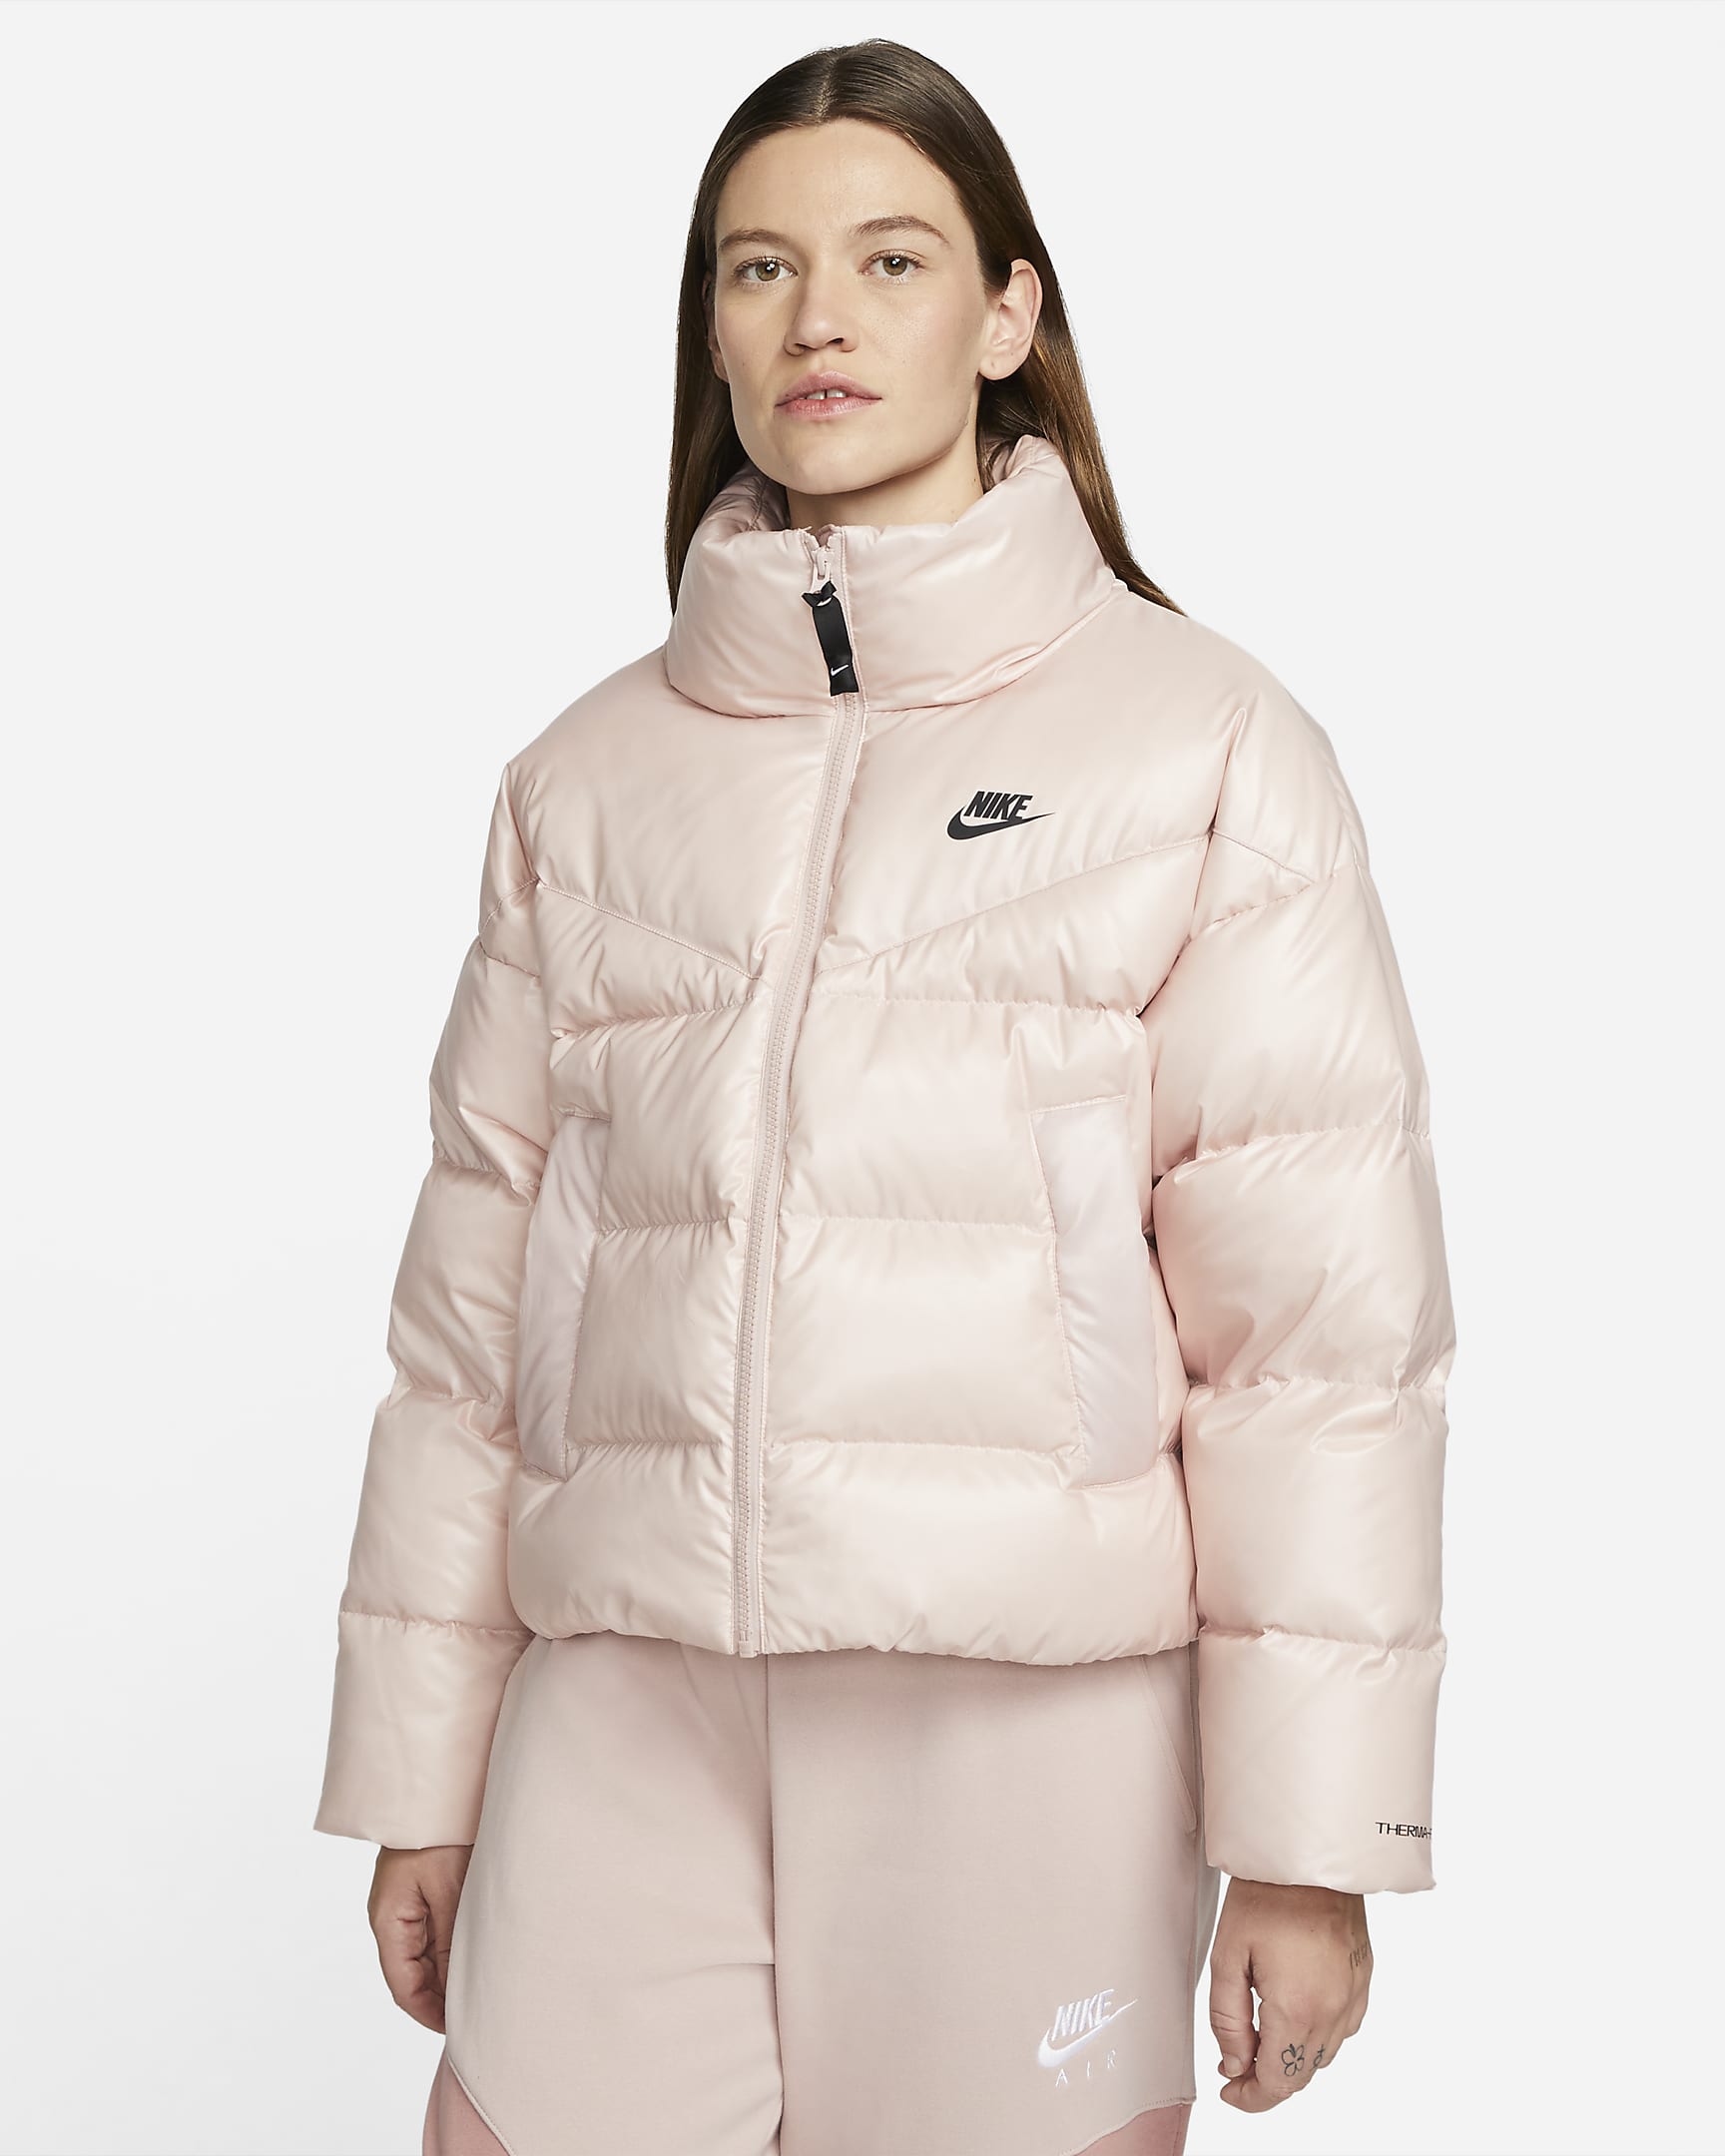 nike-sportswear-therma-fit-city-series-womens-jacket-PLMmzG.png